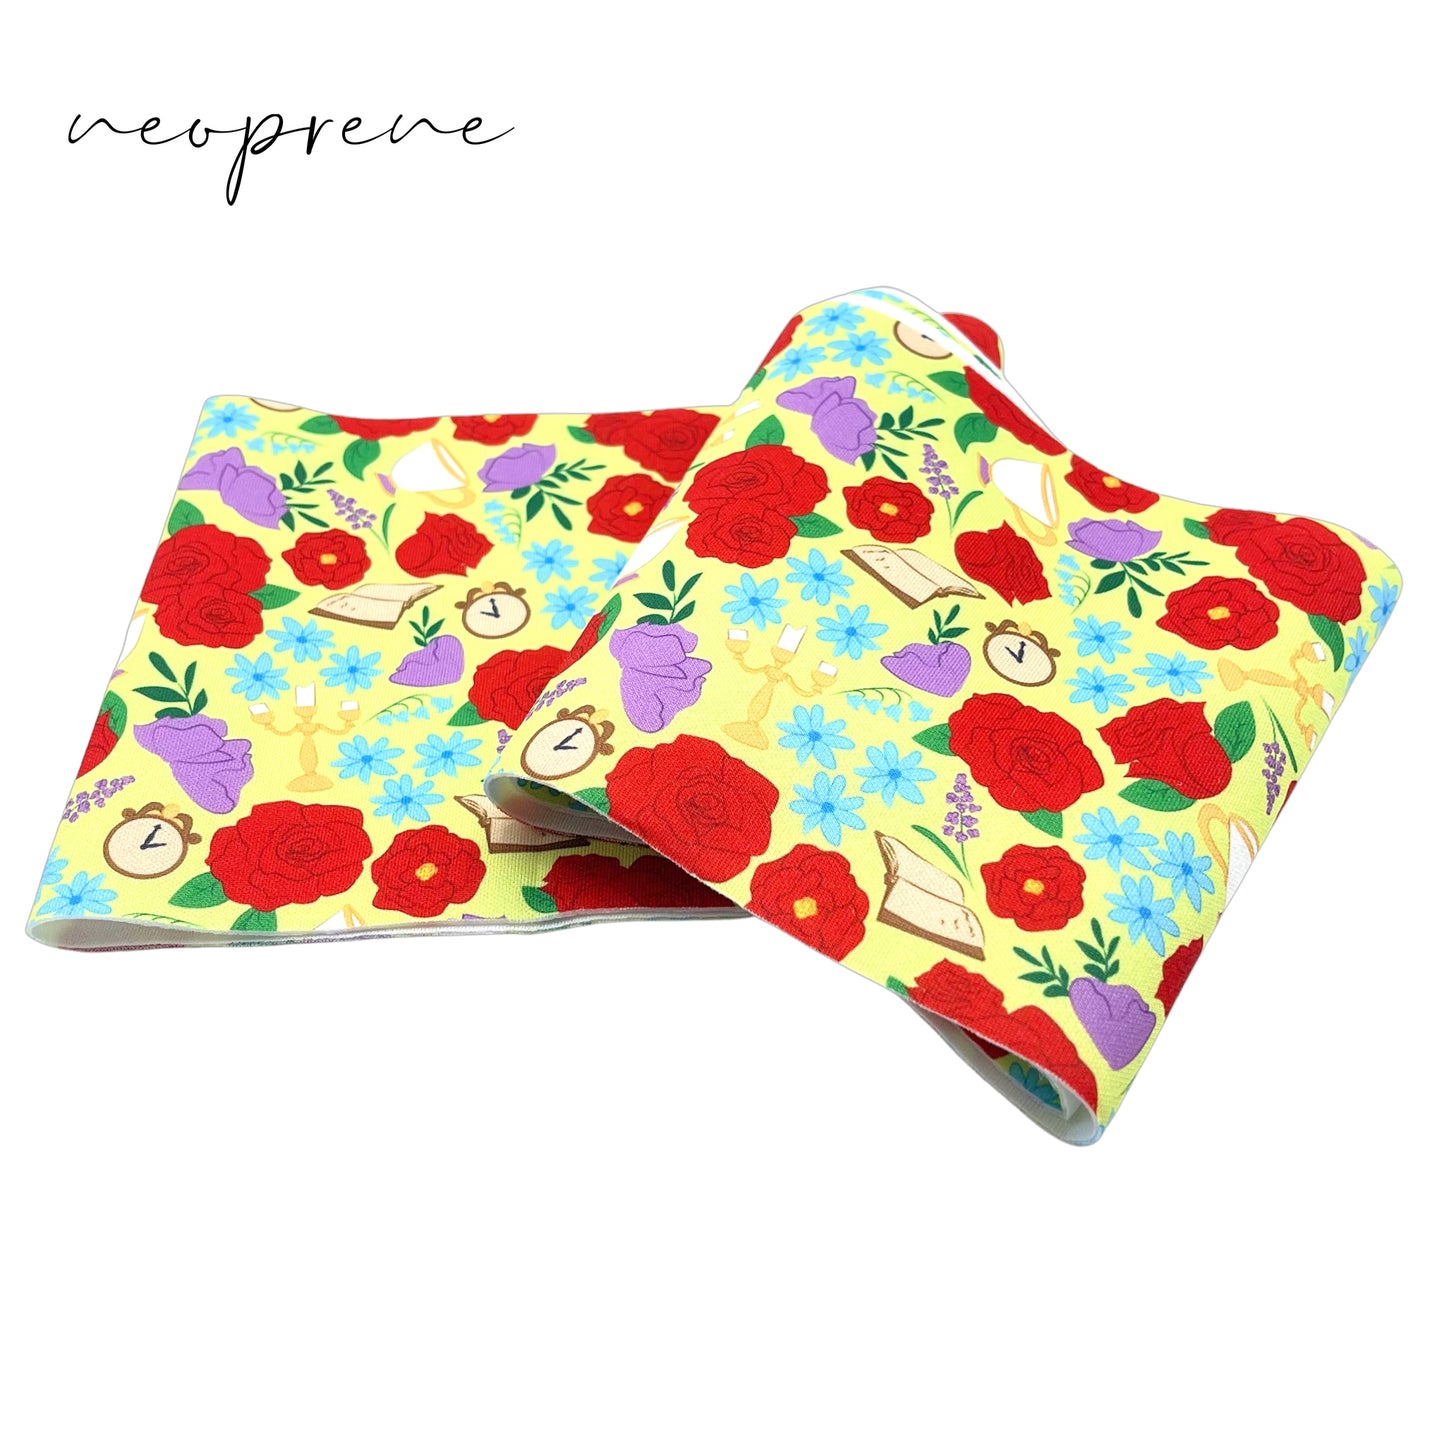 Folded pale yellow neoprene fabric with red, light blue, and purple floral princess pattern including clock face, teacups, candle sticks, and books.